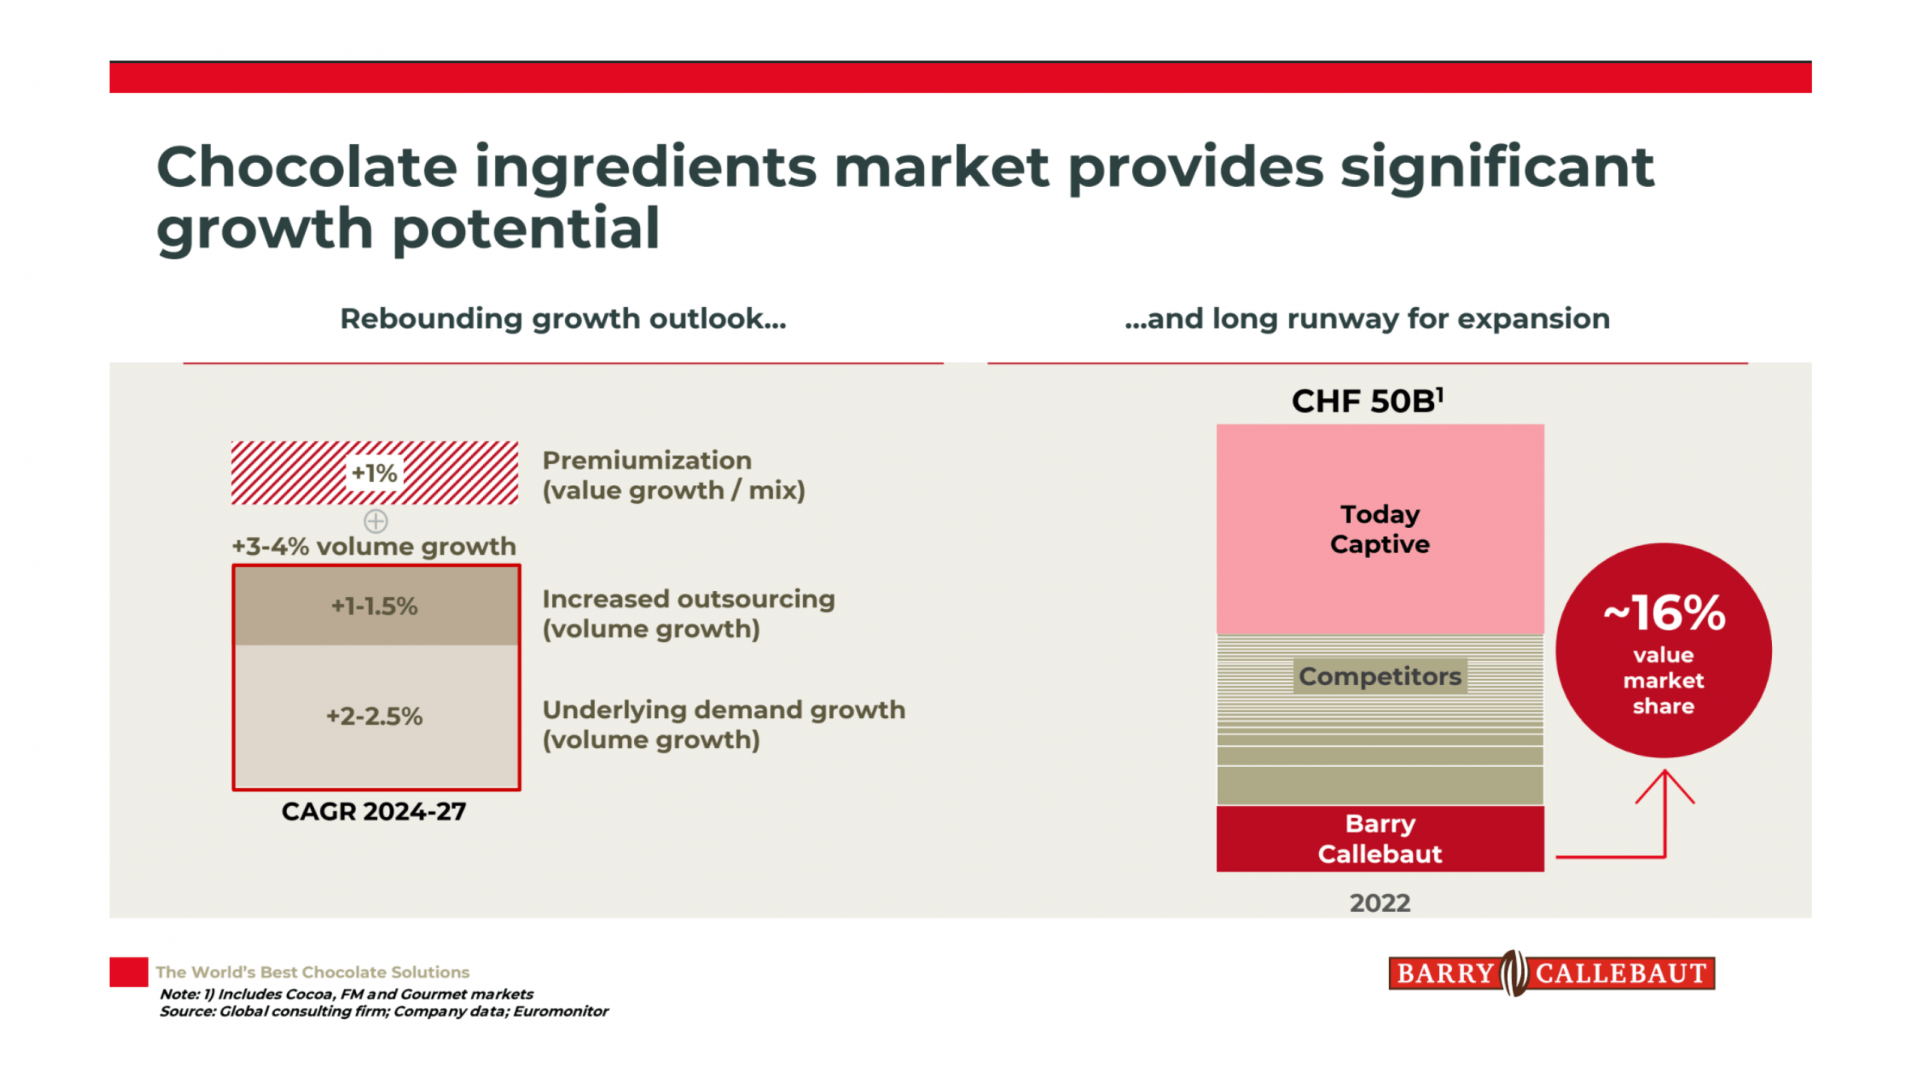 Why Invest in BC Slideshow - Chocolate ingredients